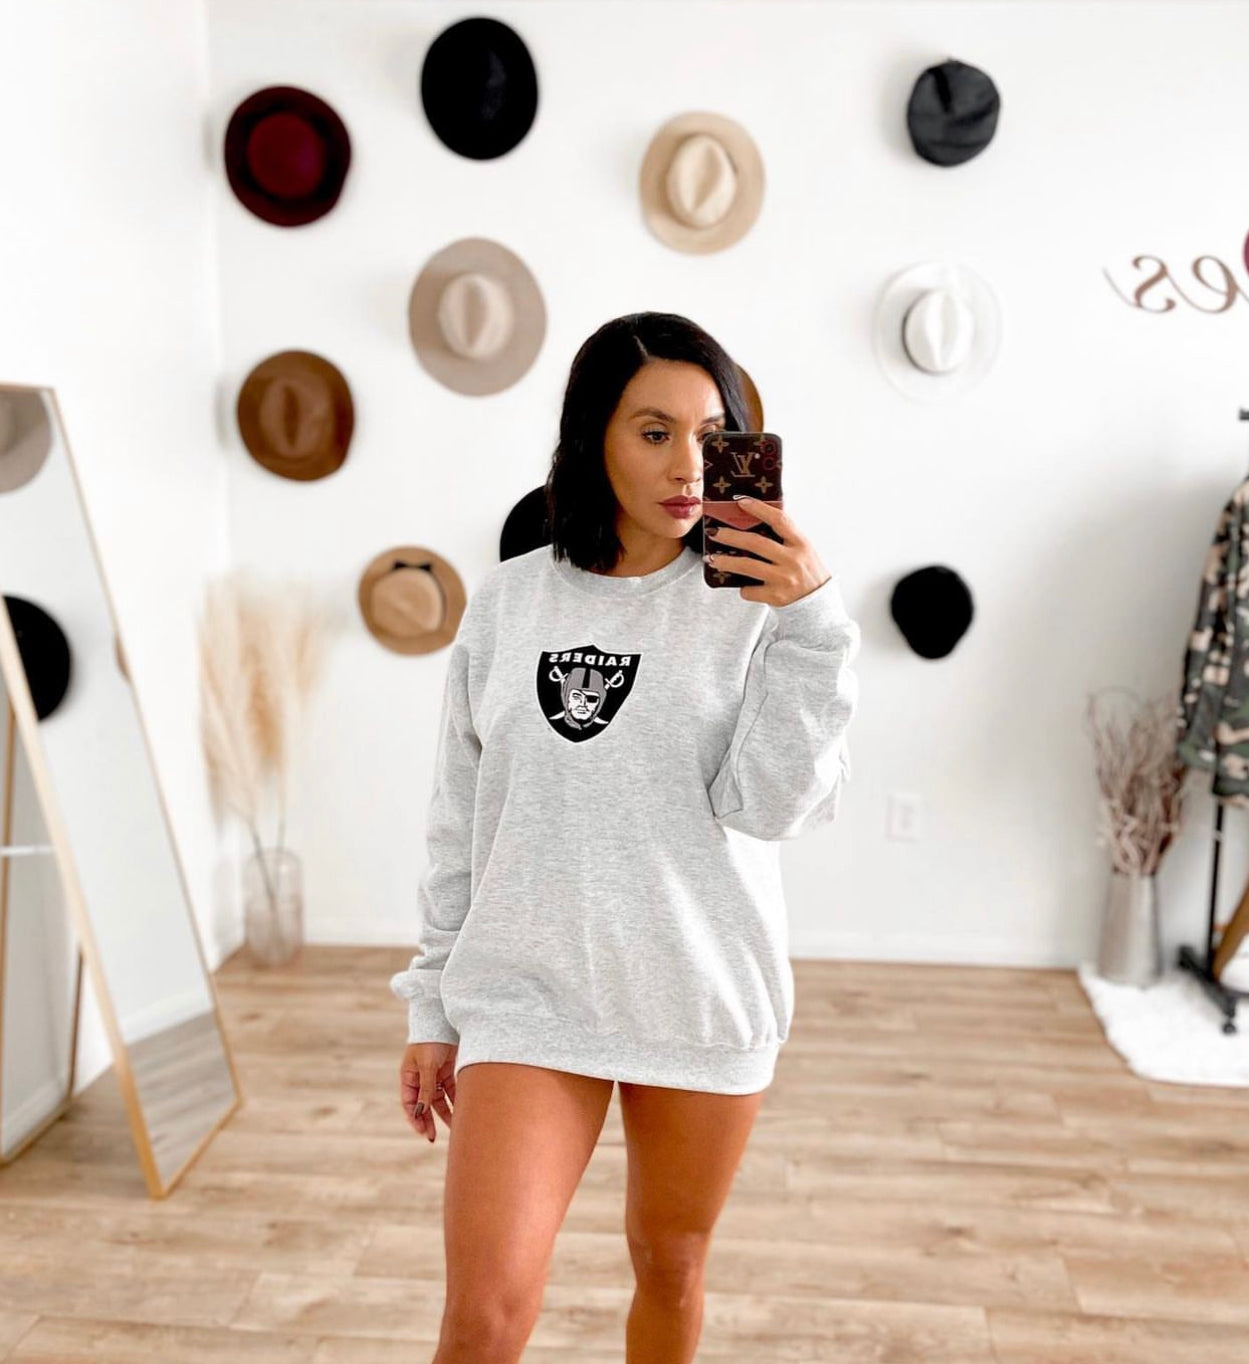 Silver and Black embroidered crewneck